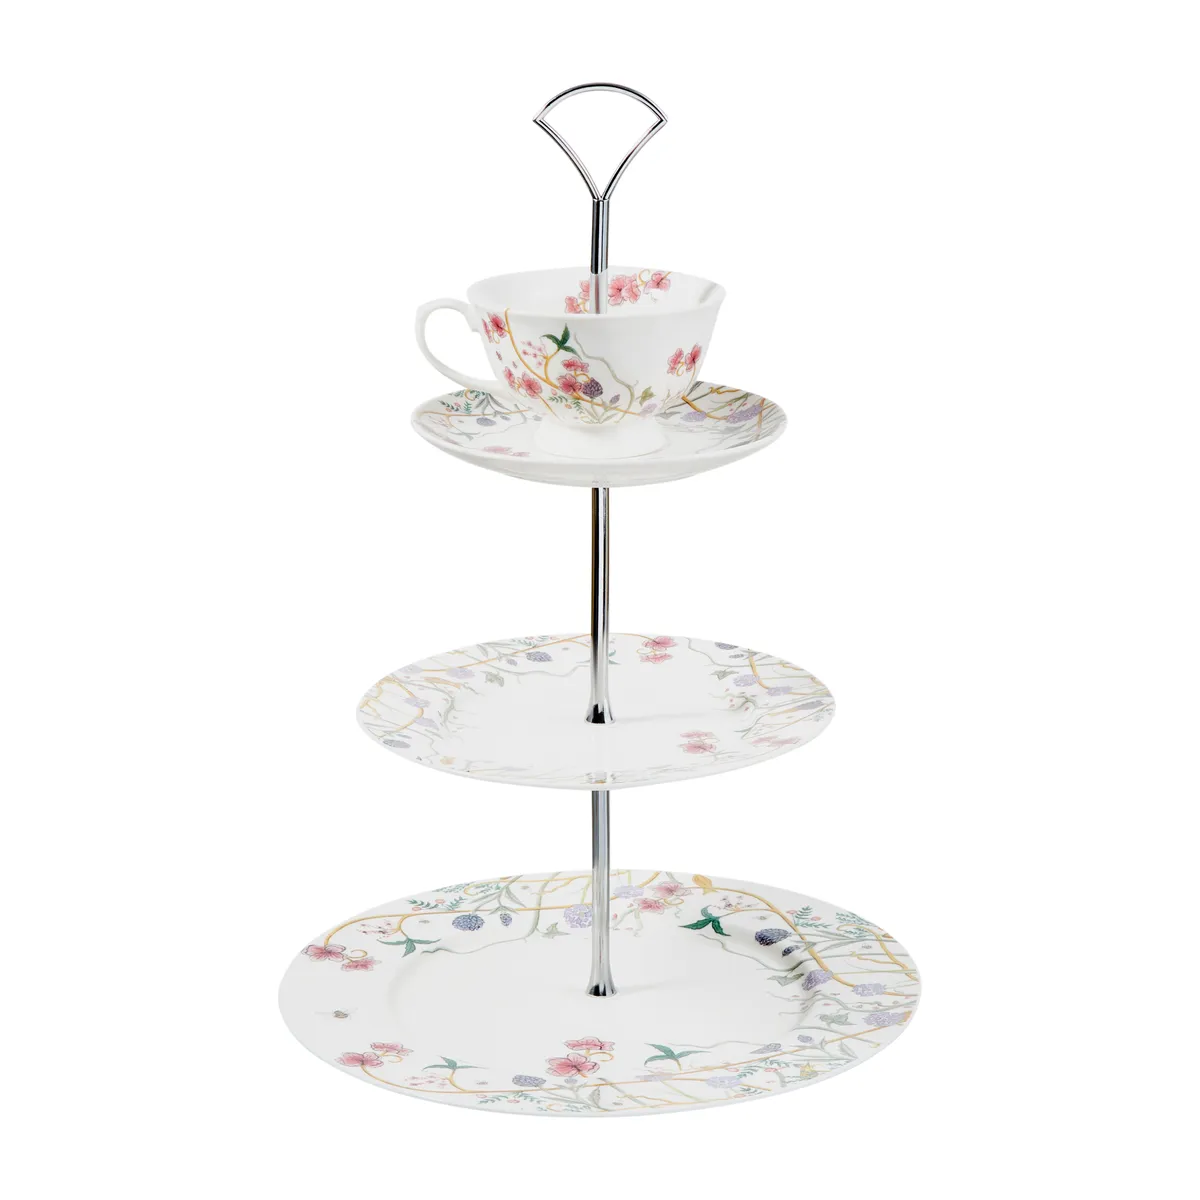 Escape to the Chateau cake stand, £20, Sainsbury's.